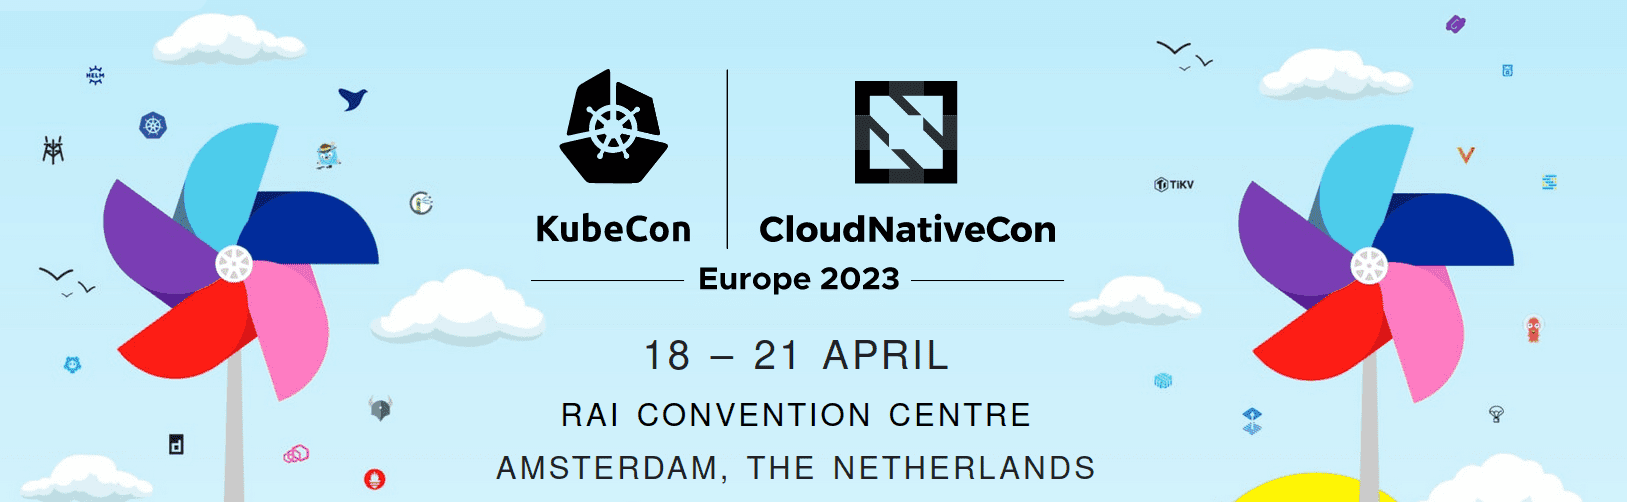 CloudNativeCon / KubeCon EU 2023 conducted from 18-21 April, RAI Convention Centre, Amsterdam, The Netherlands